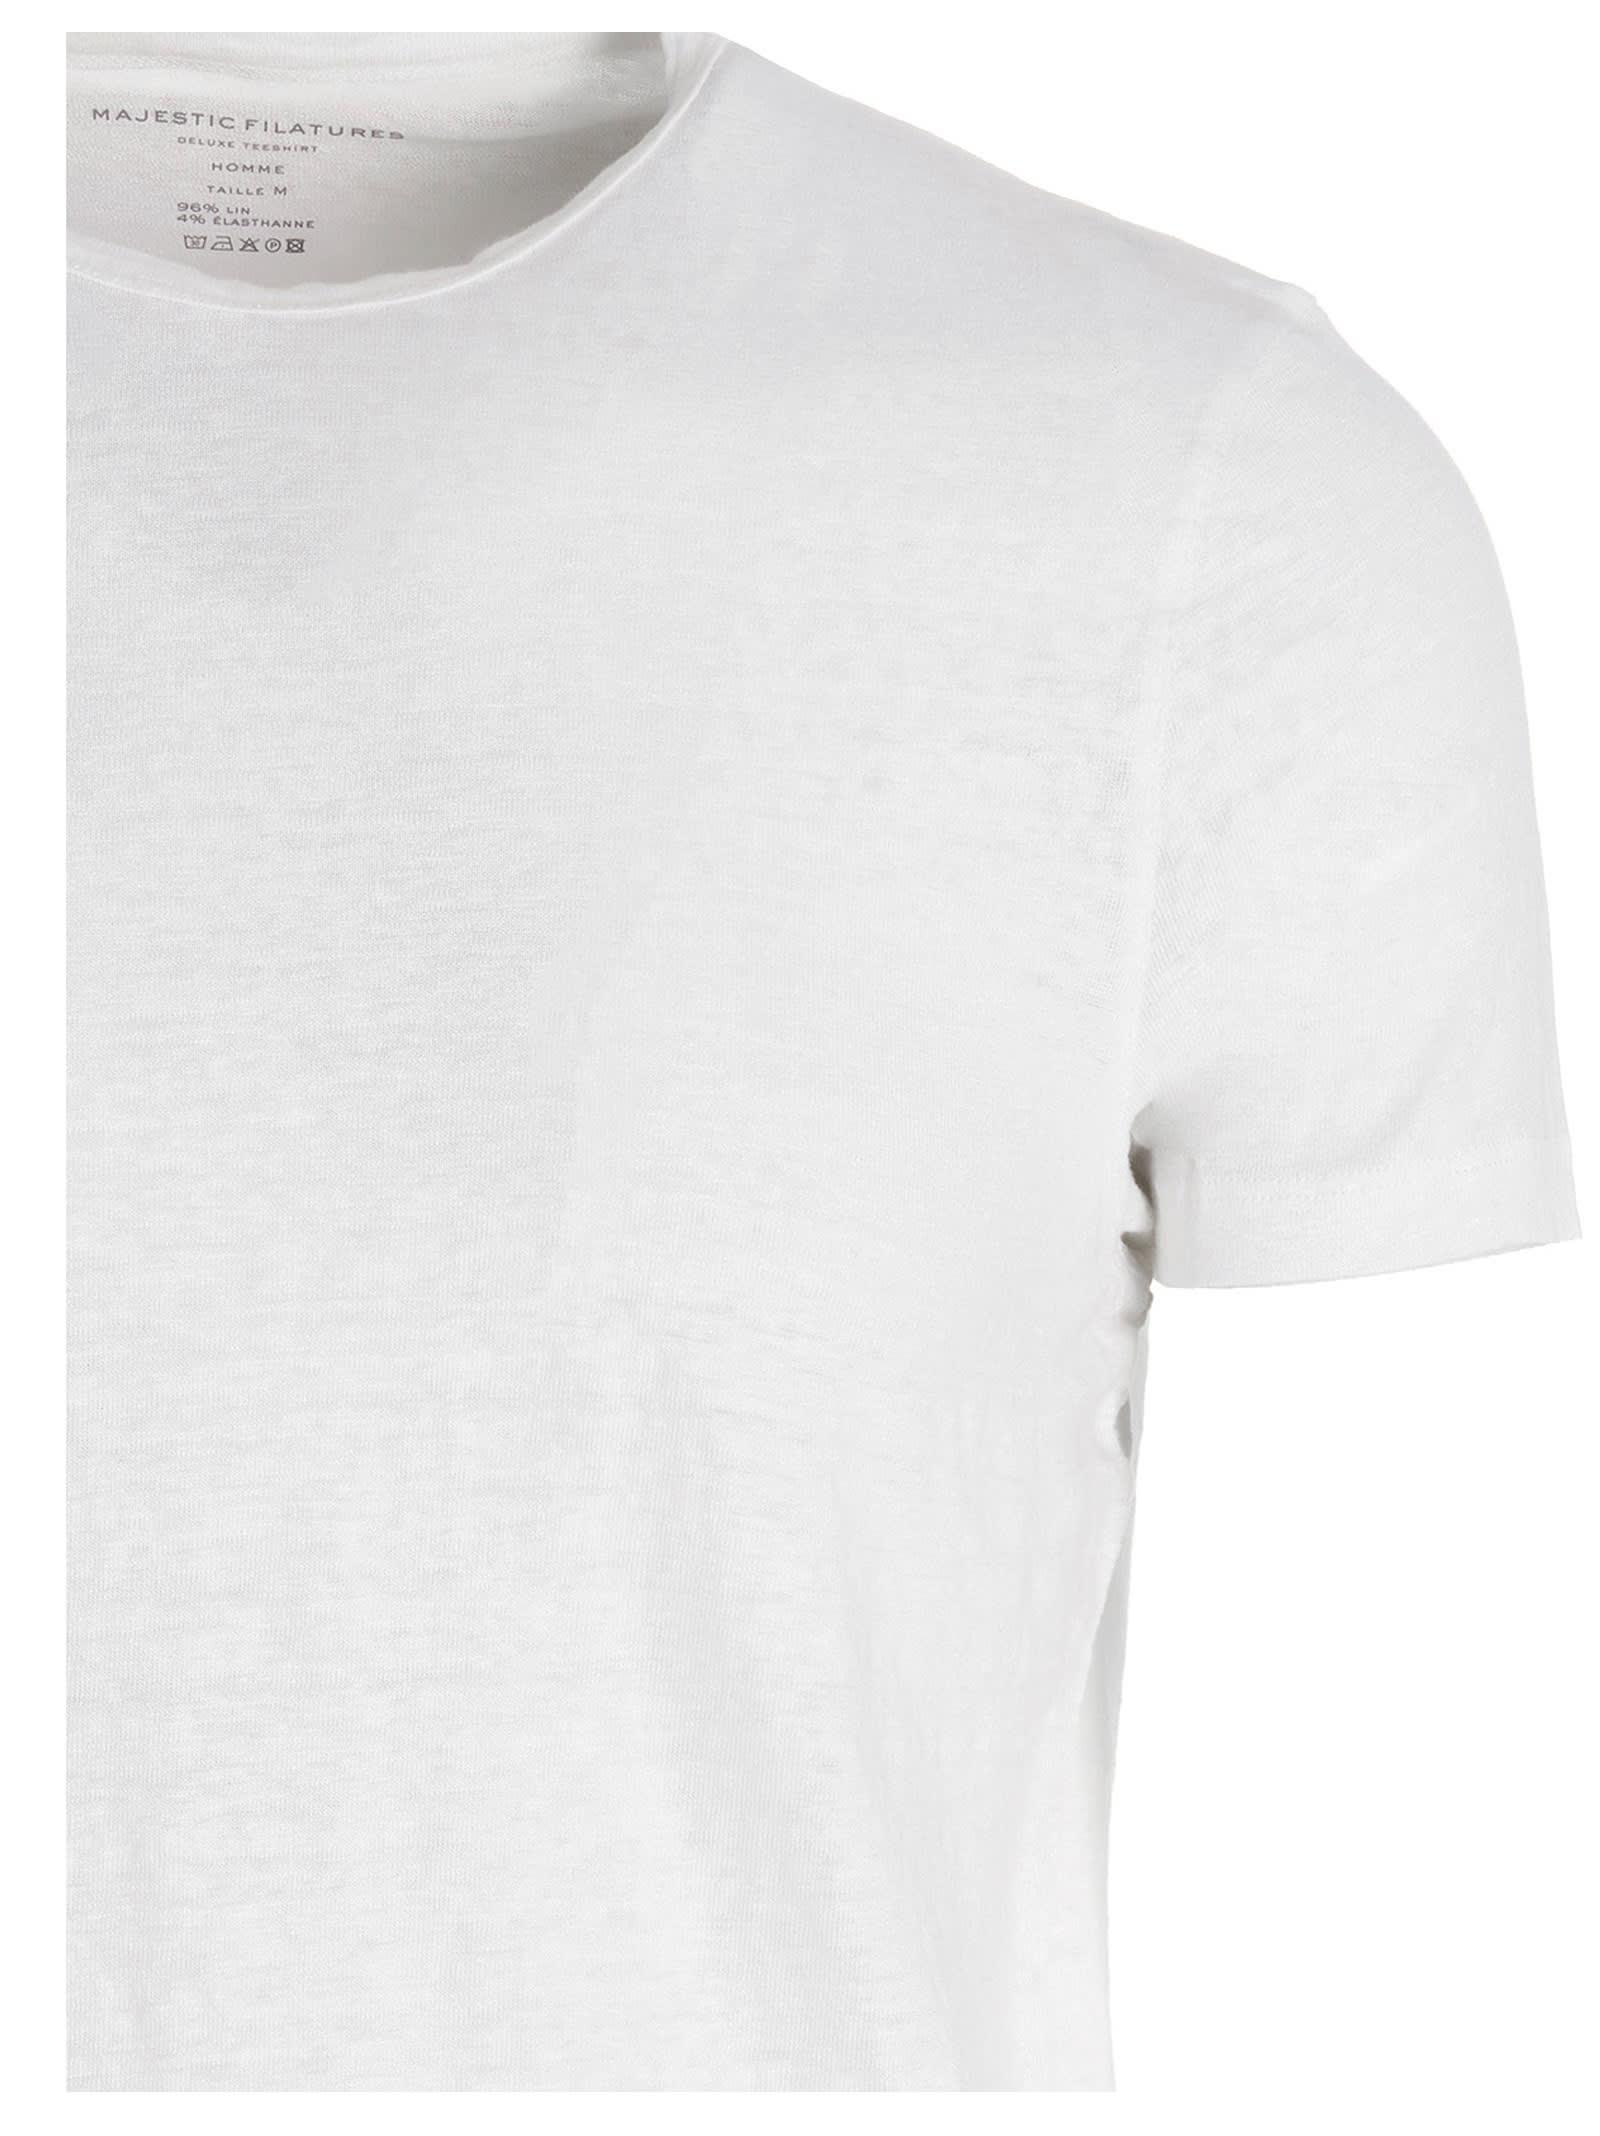 Majestic Filatures Stretch Linen T-shirt in White for Men - Save 1% | Lyst